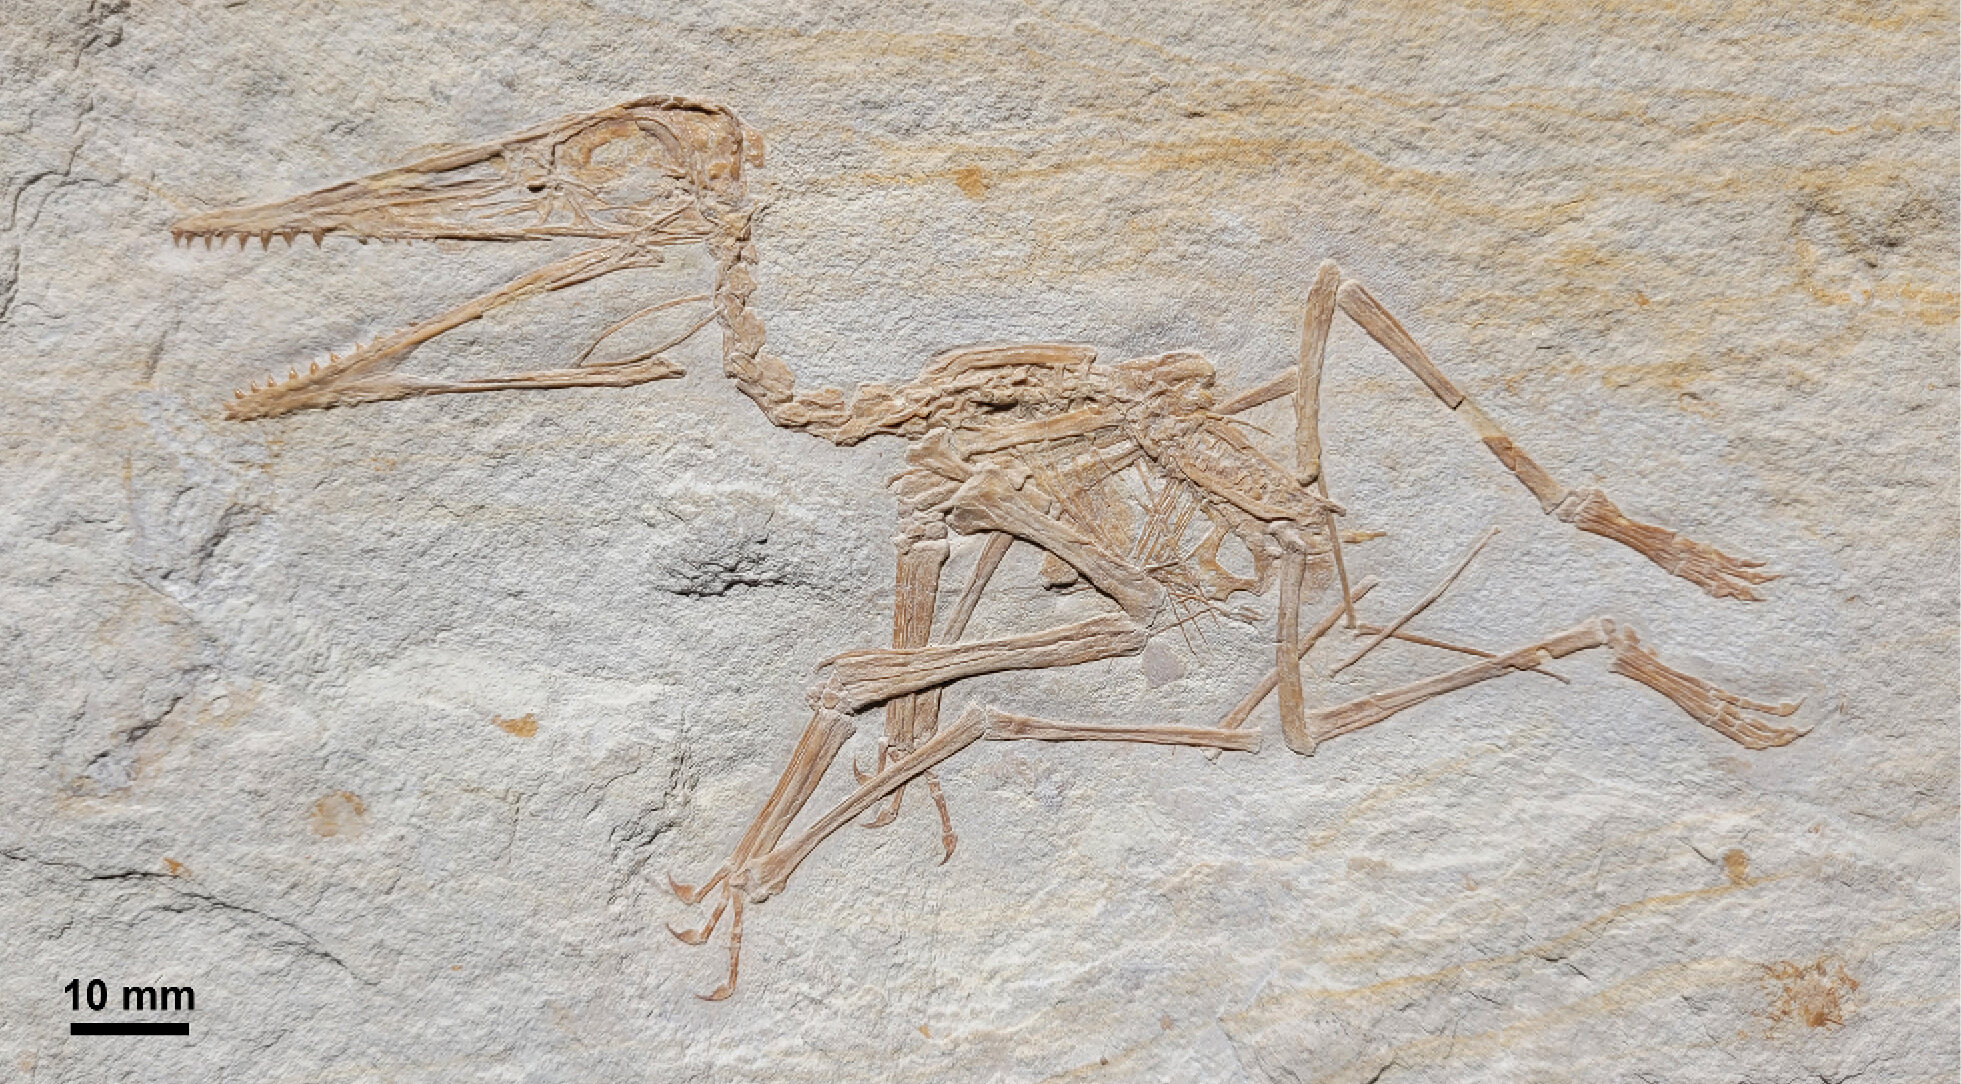 Oldest Pterodactylus fossil found in Germany